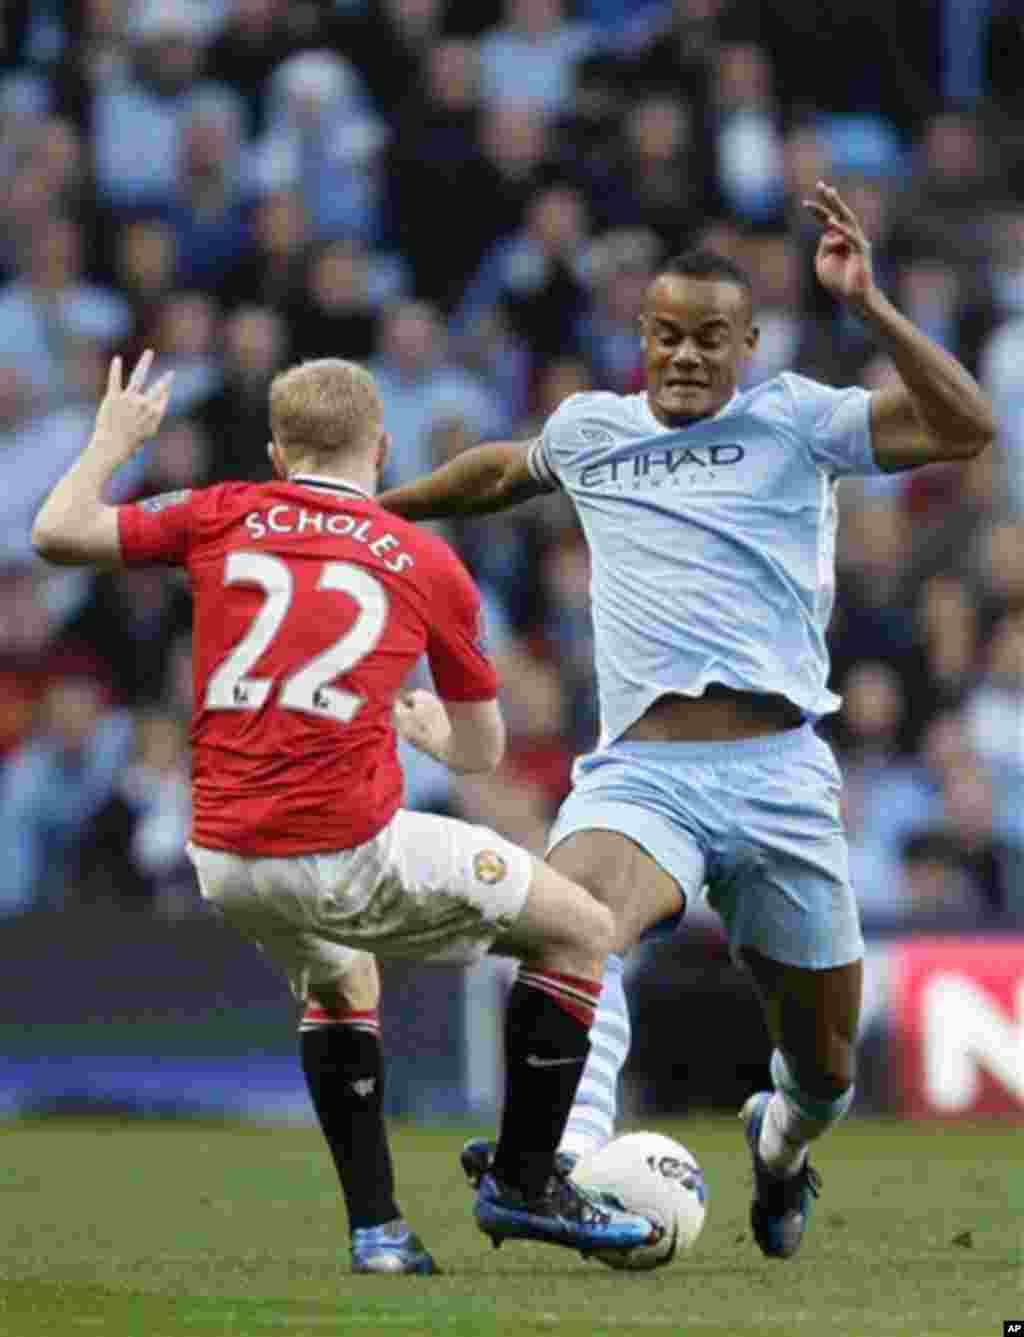 Manchester City's Vincent Kompany, right, fights for the ball against Manchester United's Paul Scholes during their English Premier League soccer match at The Etihad Stadium, Manchester, England, Monday, April 30, 2012. (AP Photo/Jon Super)